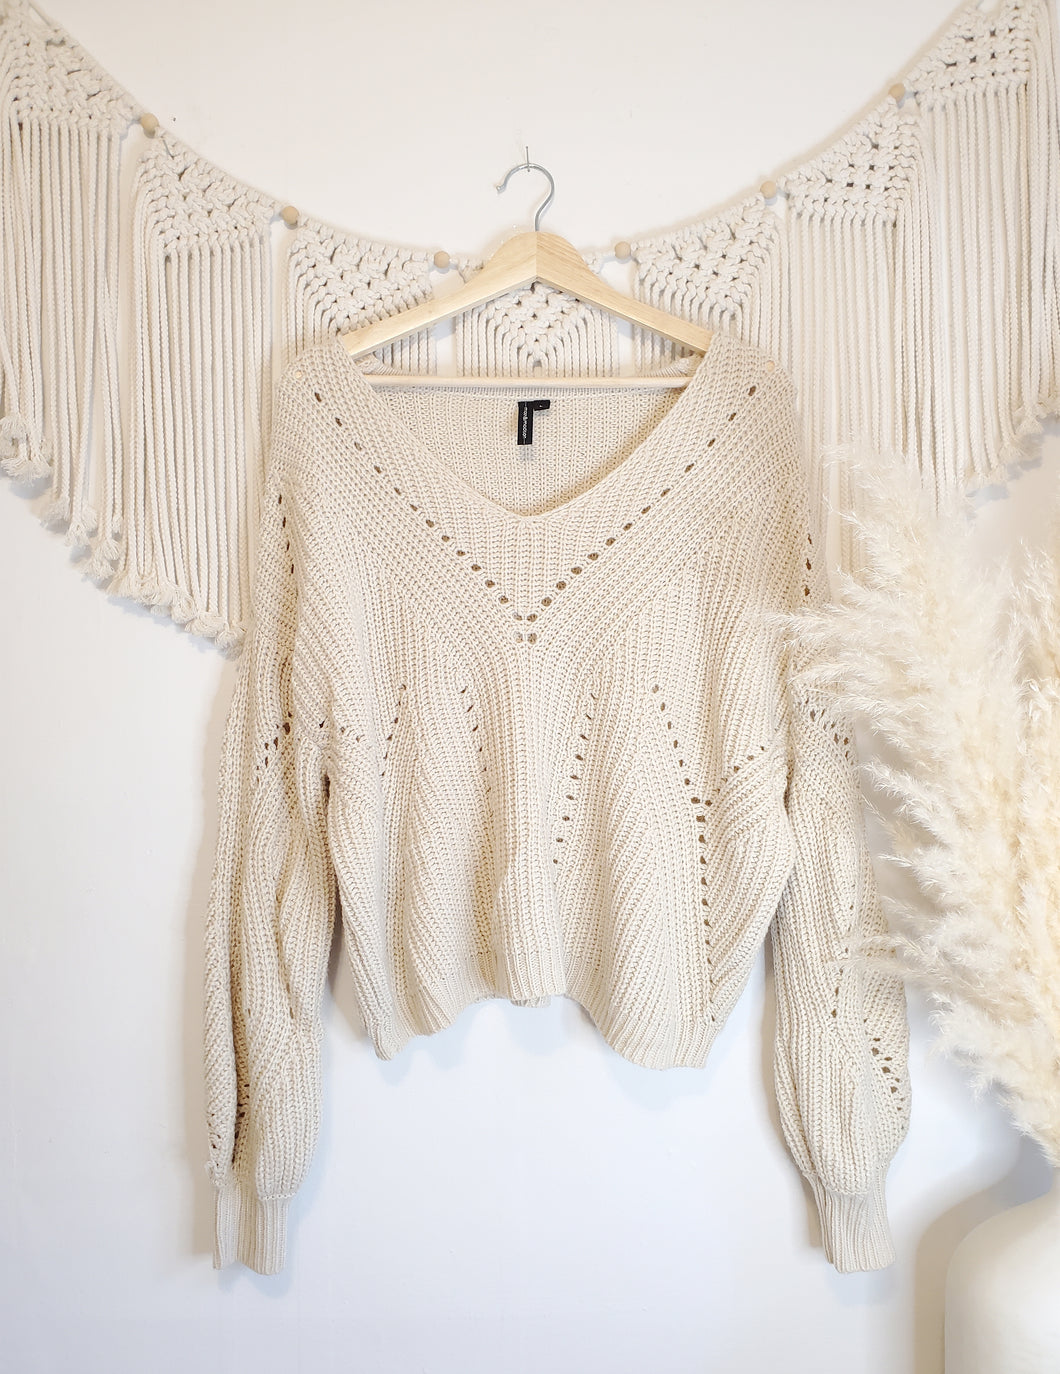 Neutral Chunky Knit Sweater (L)